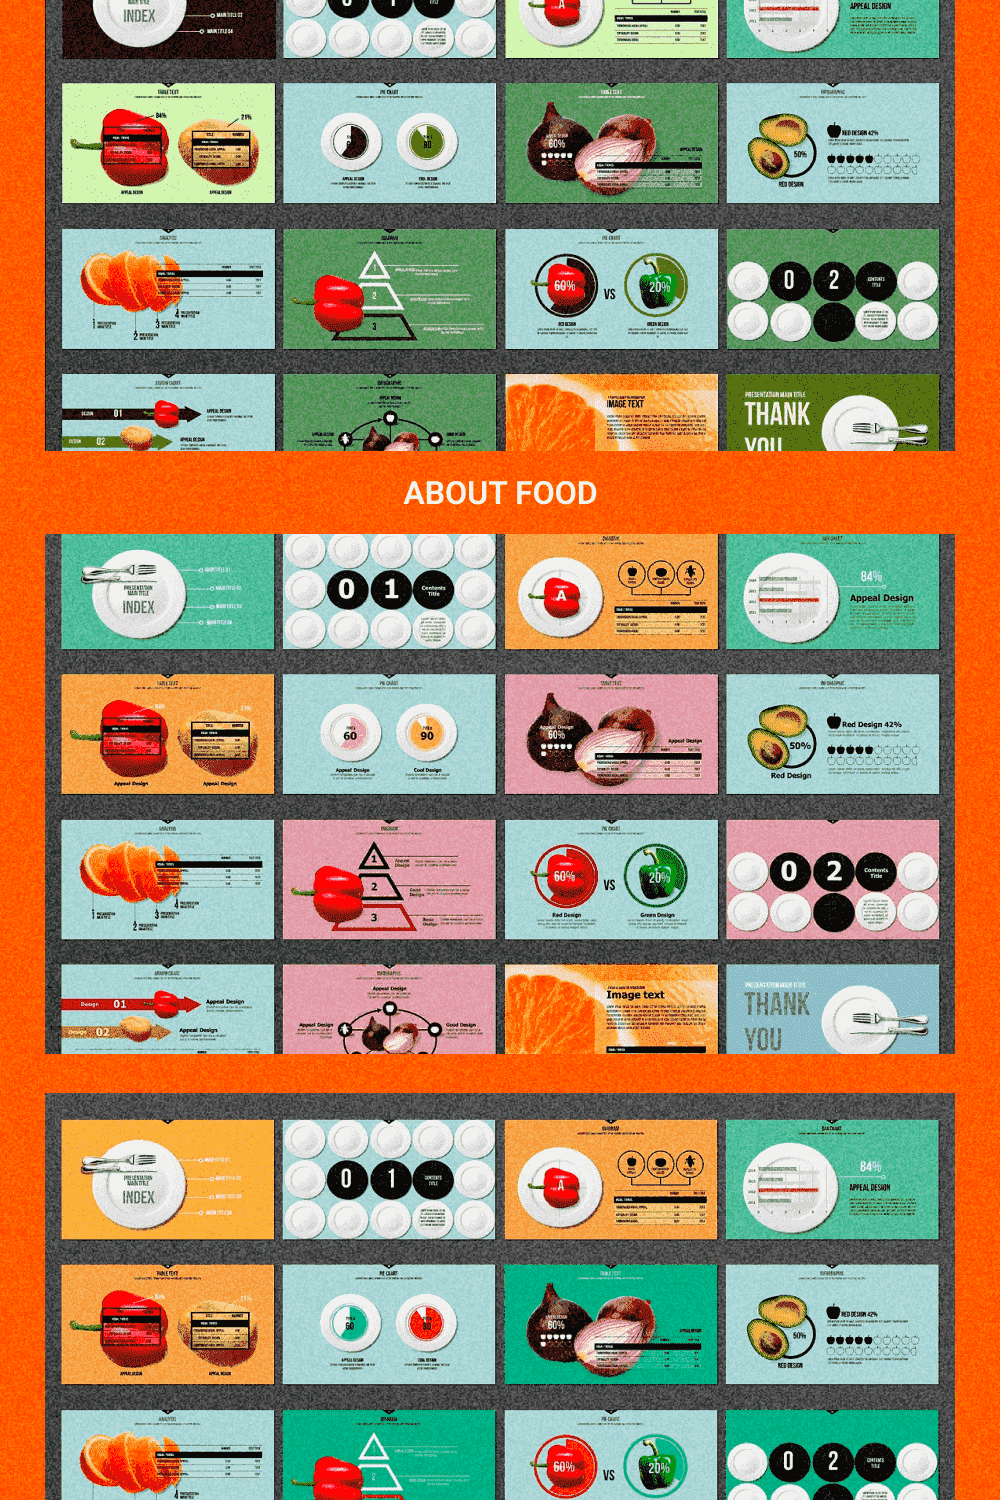 About Food - Presentation Template - "Pie Chart".